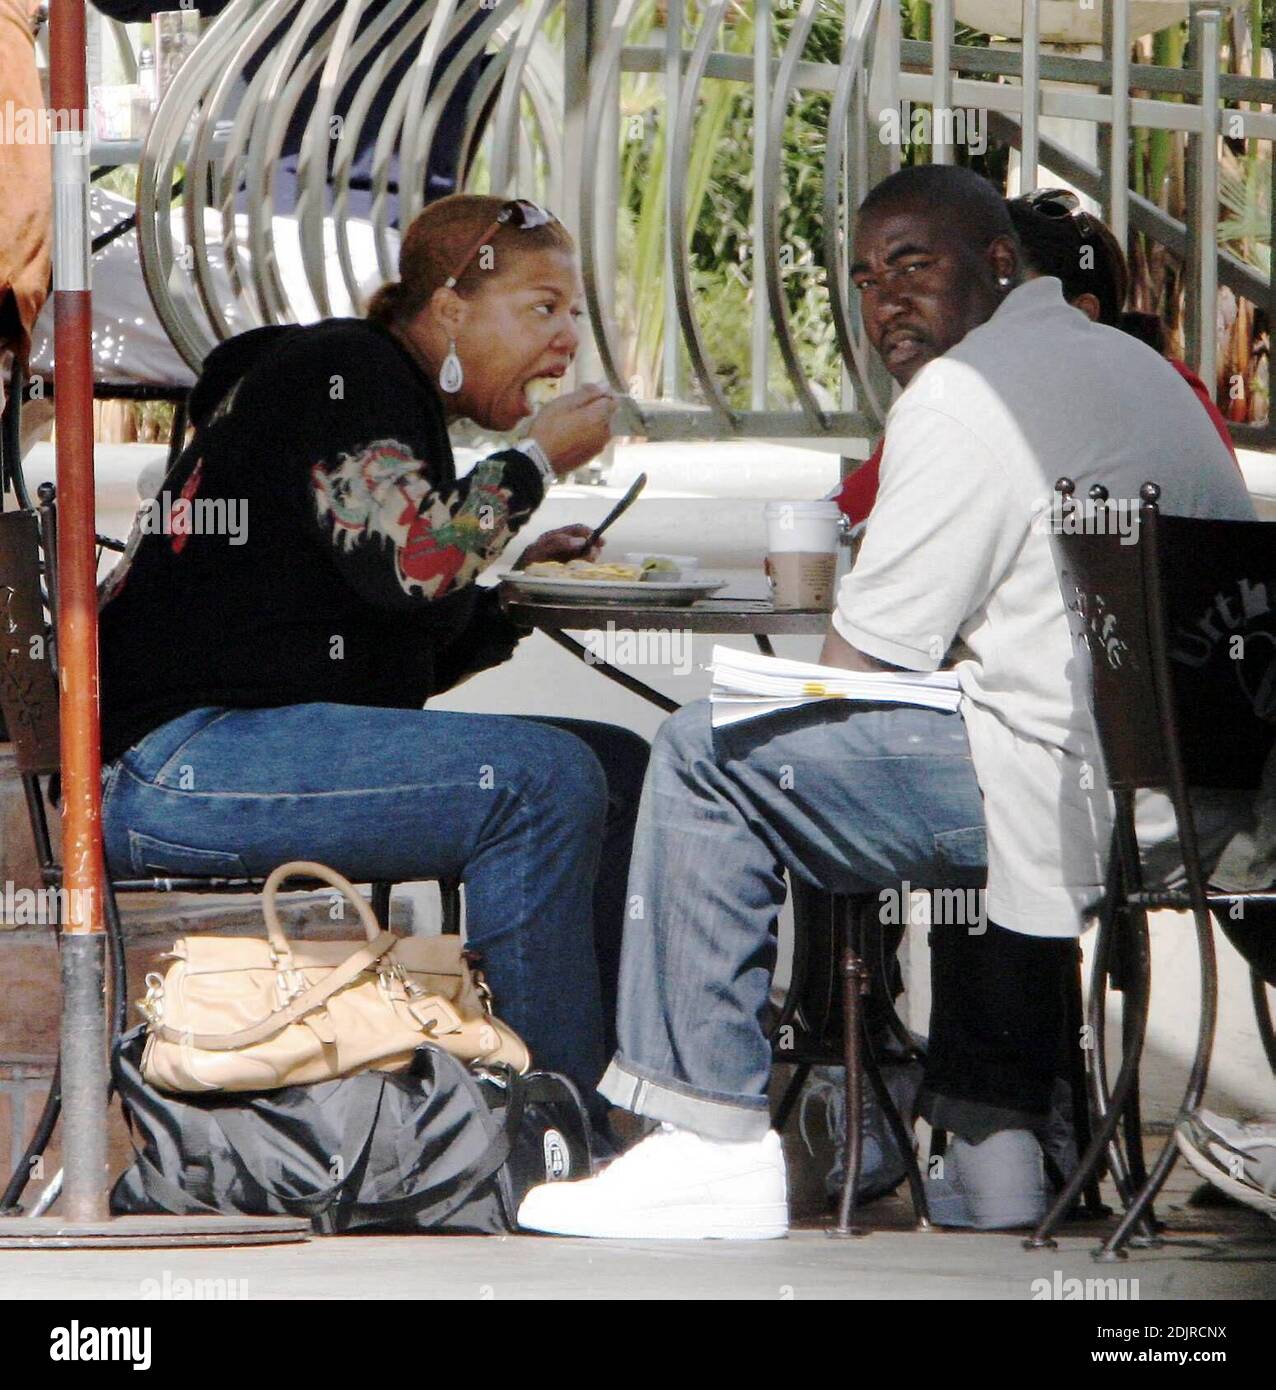 Queen Latifah seems happy to sign a pile of documents over brunch in West Hollywood, Ca. at the Urth Cafe. 10/14/06 Stock Photo